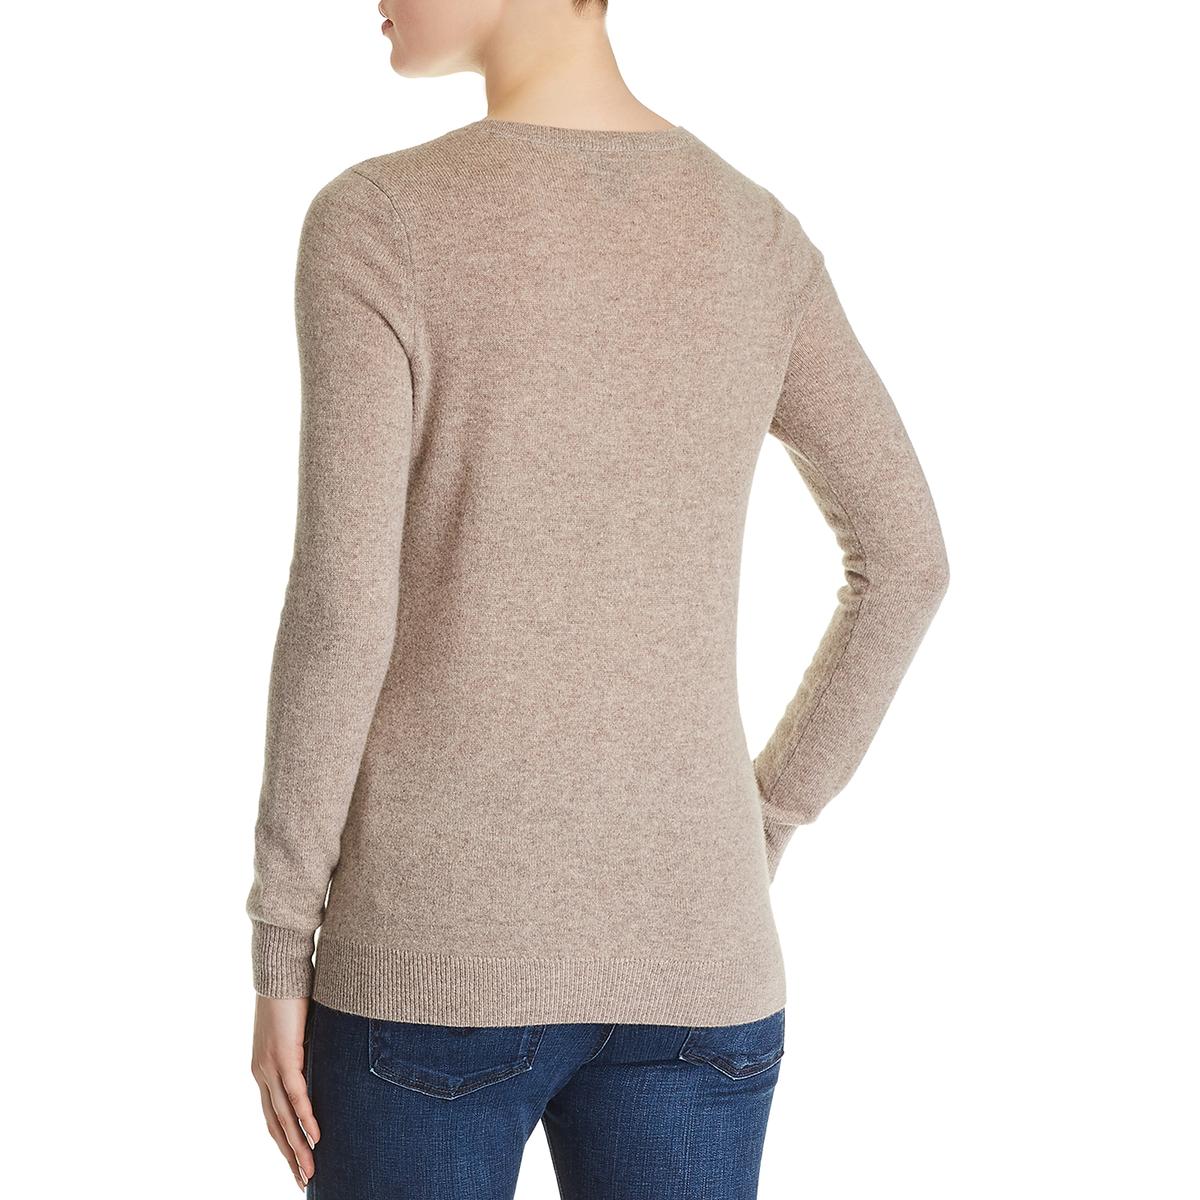 Private Label Womens Gray Cashmere Hi-Low V-Neck Tunic Sweater Top XL BHFO 1799 